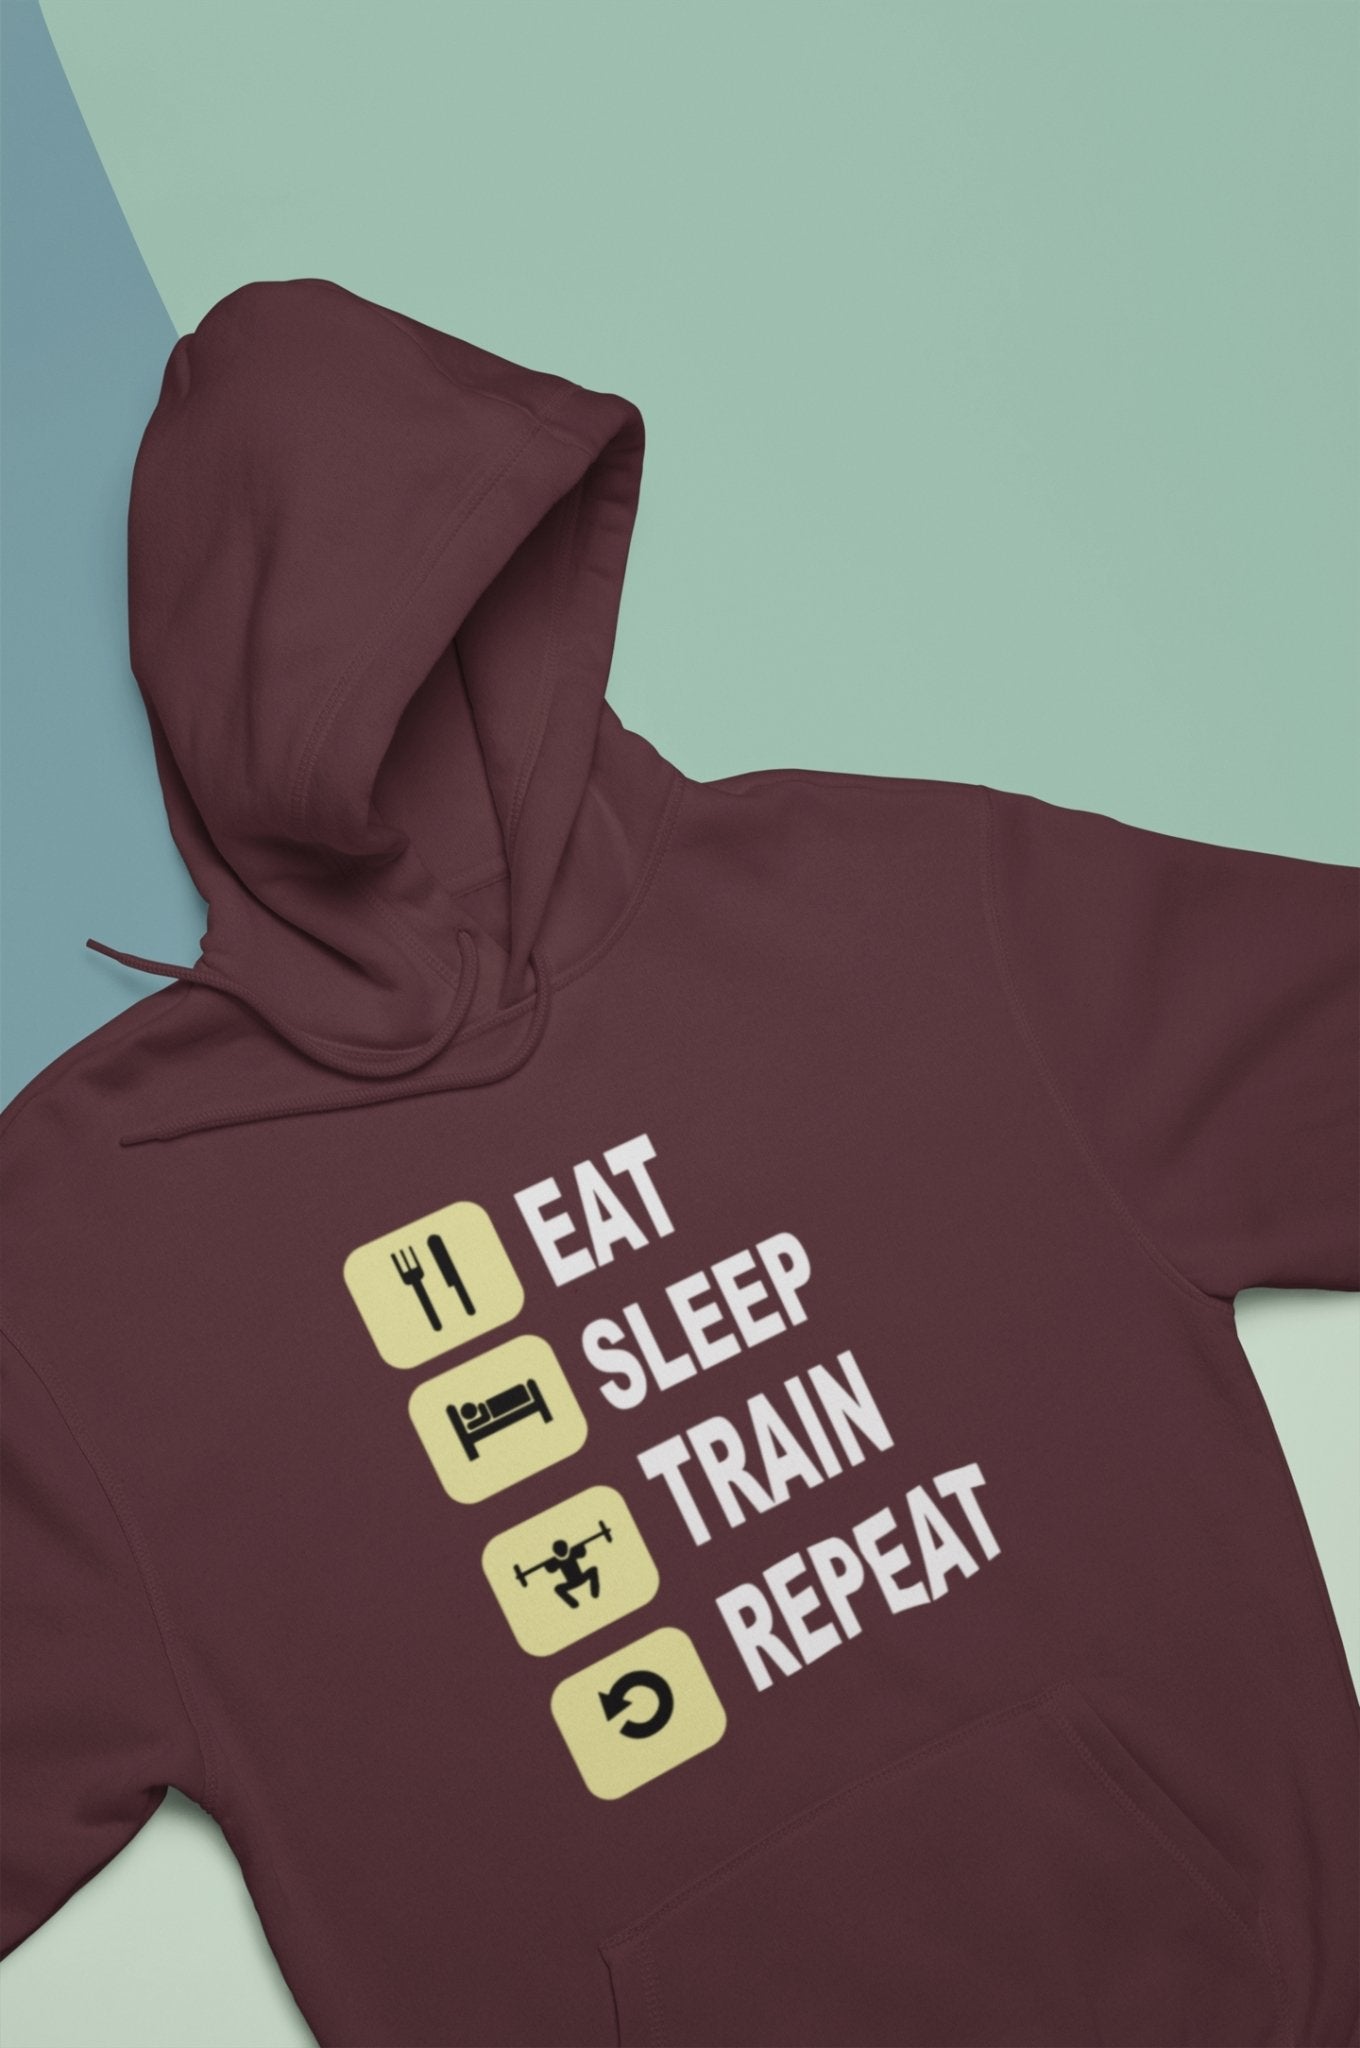 Eat Sleep Train Repeat Gym And Workout Men Hoodies-FunkyTradition - Funky Tees Club